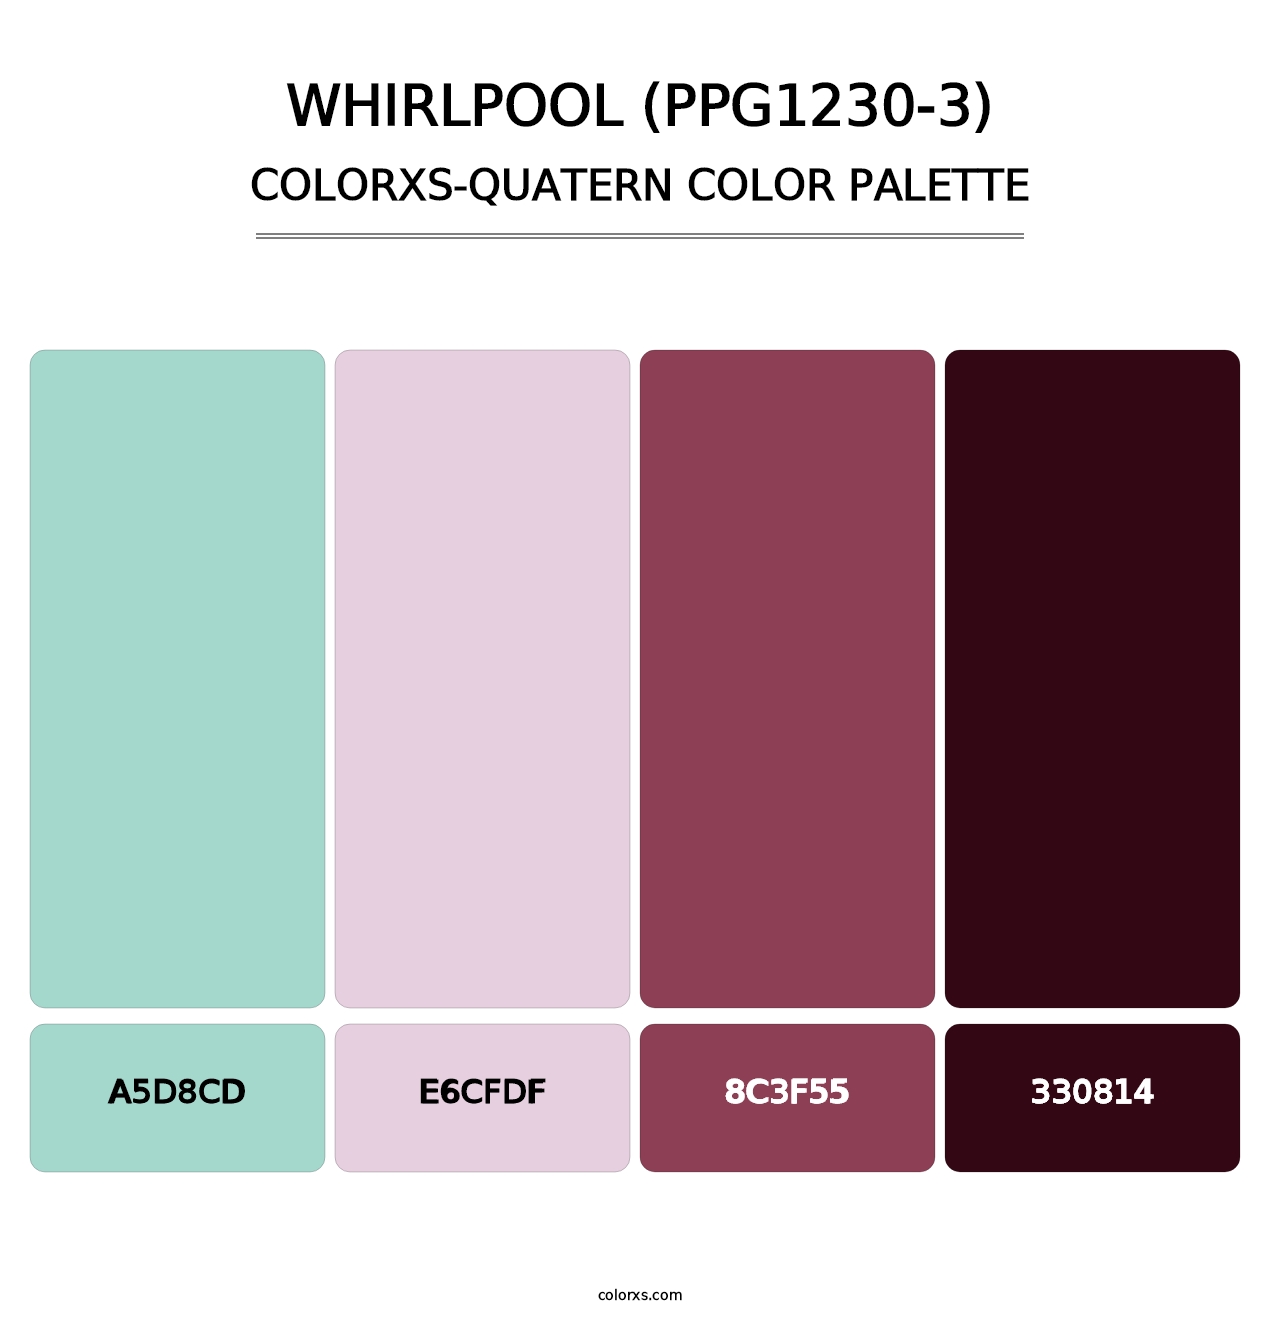 Whirlpool (PPG1230-3) - Colorxs Quatern Palette